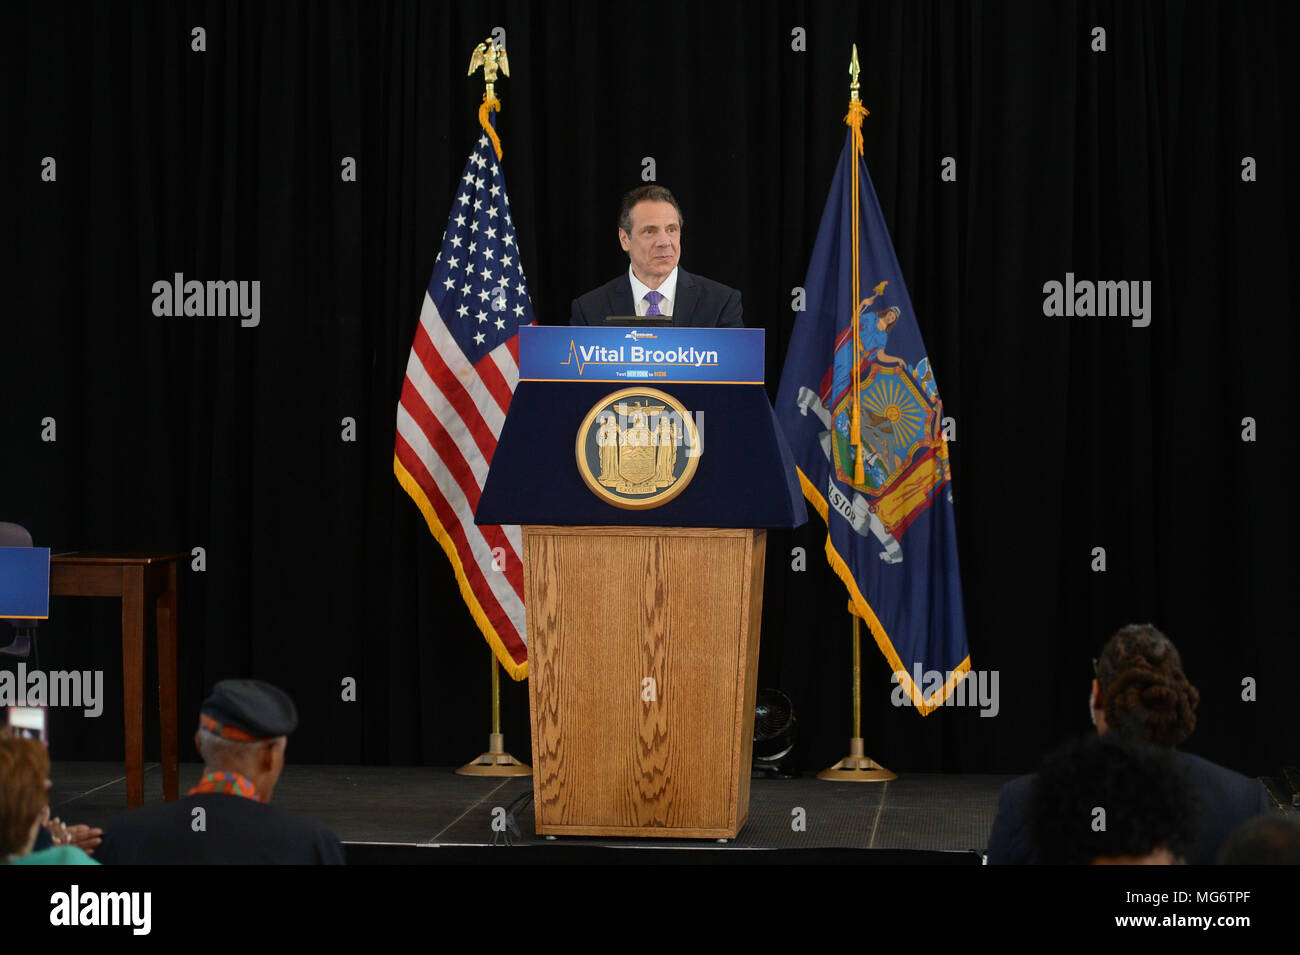 New York, USA. 26th April 2018. Governor Andrew Cuomo announces the Vital Brooklyn initiative which seeks to bring affordable housing and healthcare to central Brooklyn on April 26, 2018 in New York. Credit: Erik Pendzich/Alamy Live News Stock Photo